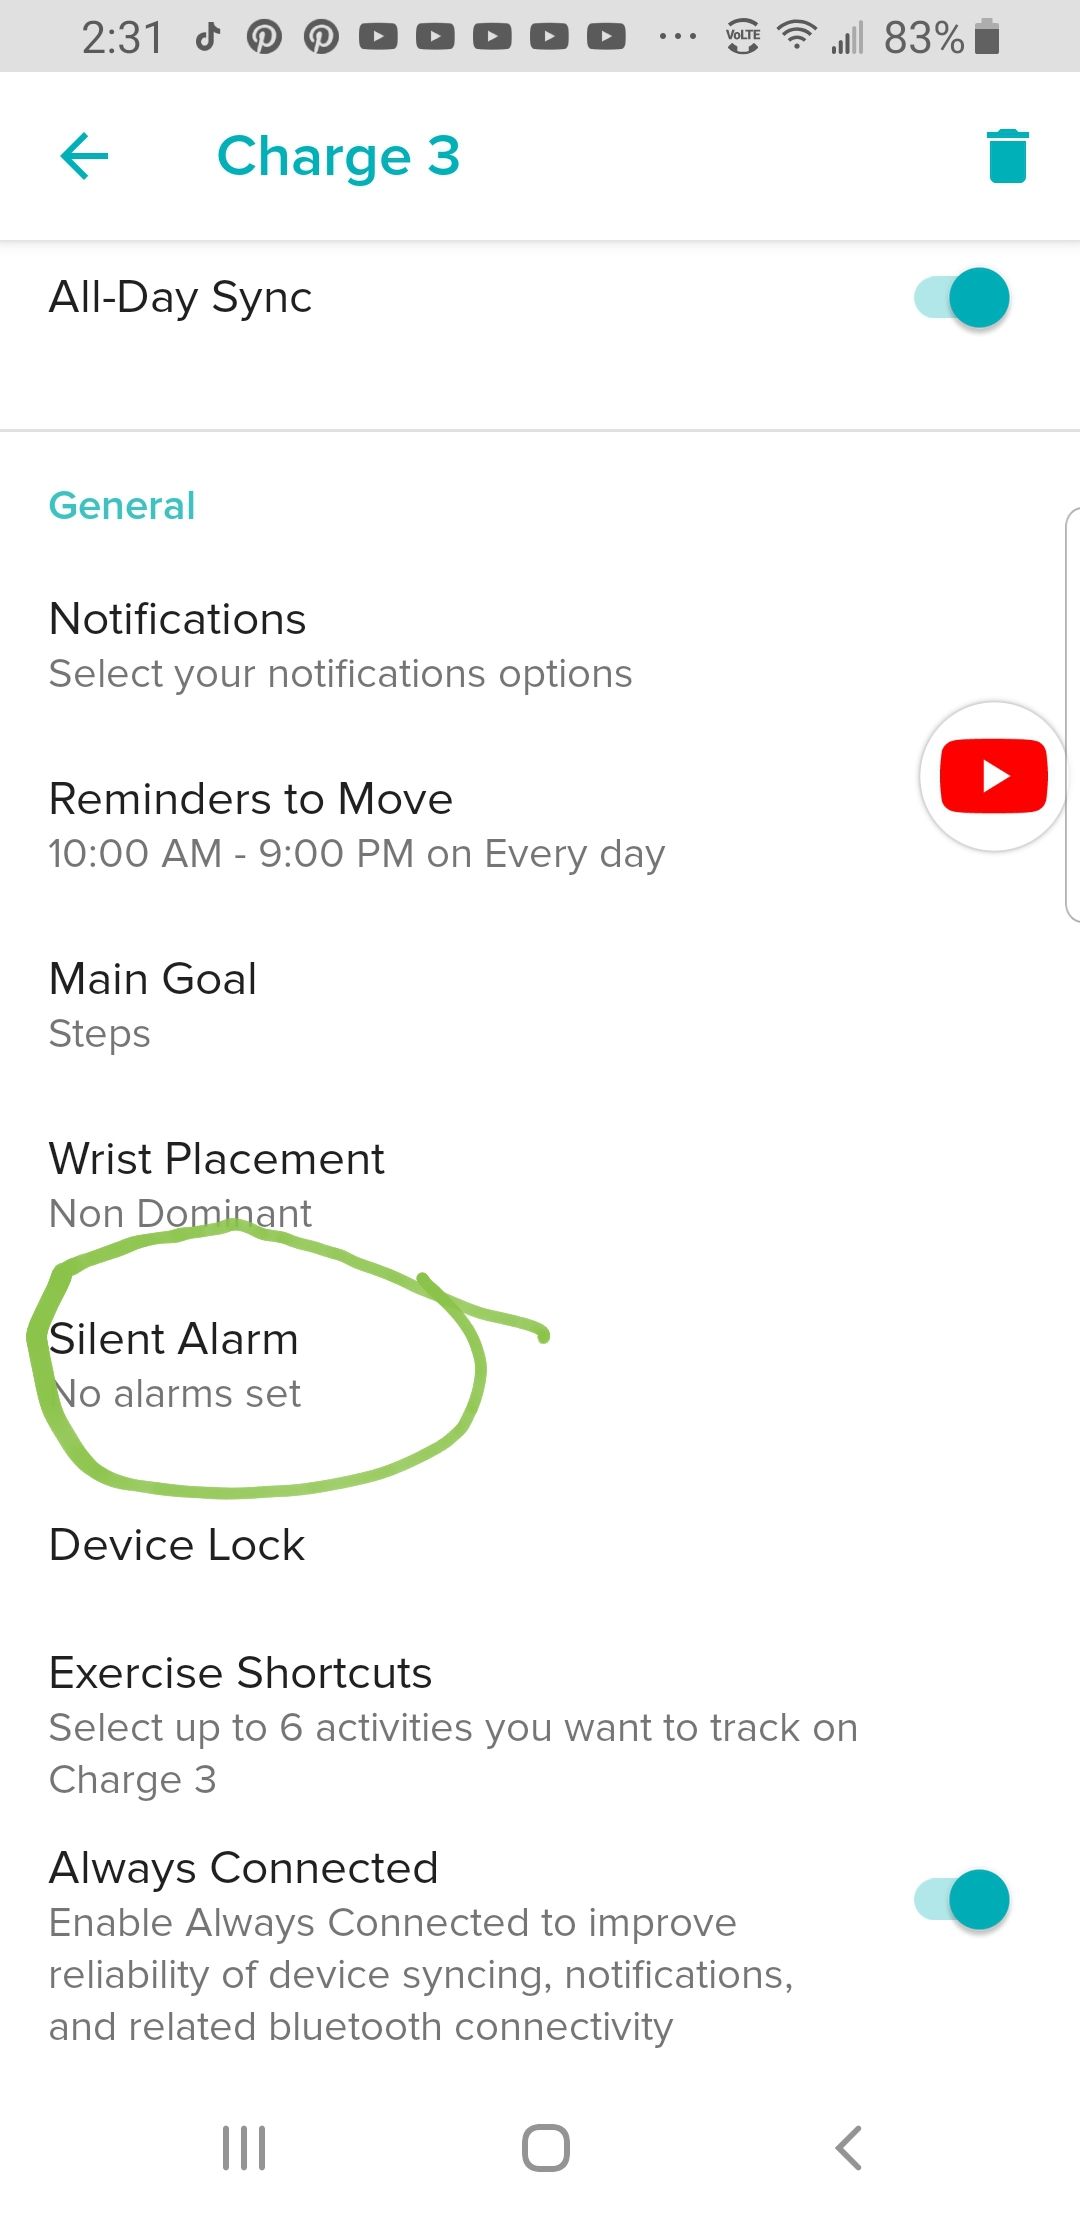 how to turn off alarm on fitbit alta hr